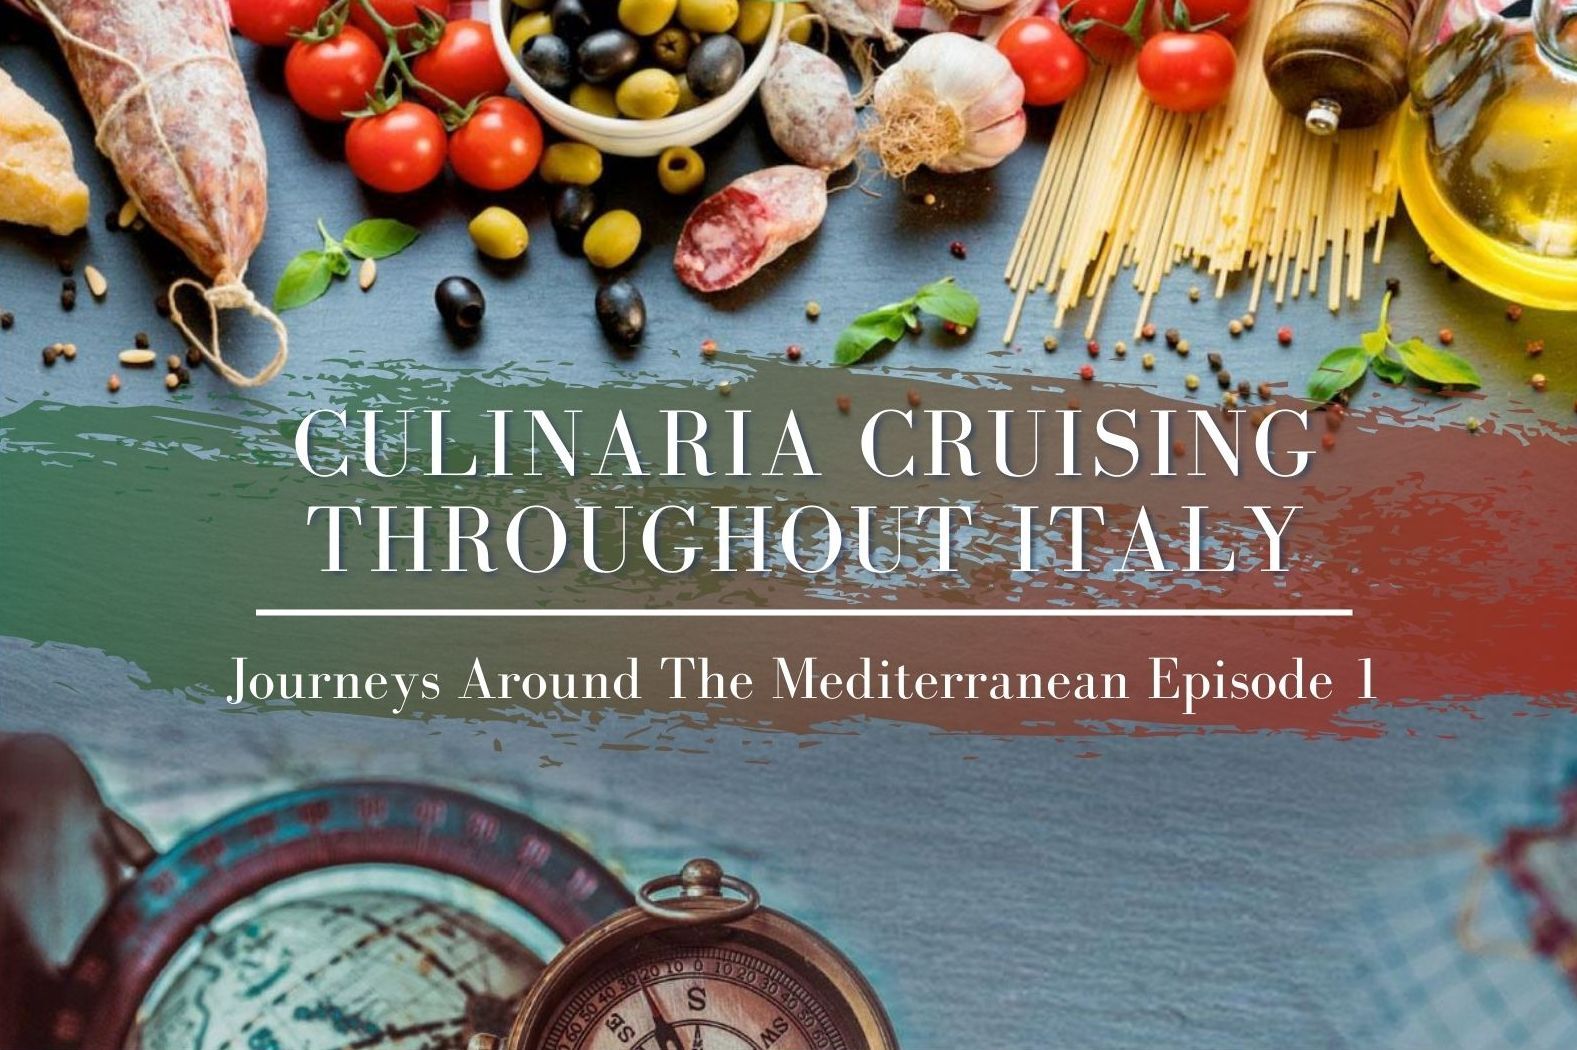 2. THE CULINARIA CRUISING THROUGHOUT ITALY 07